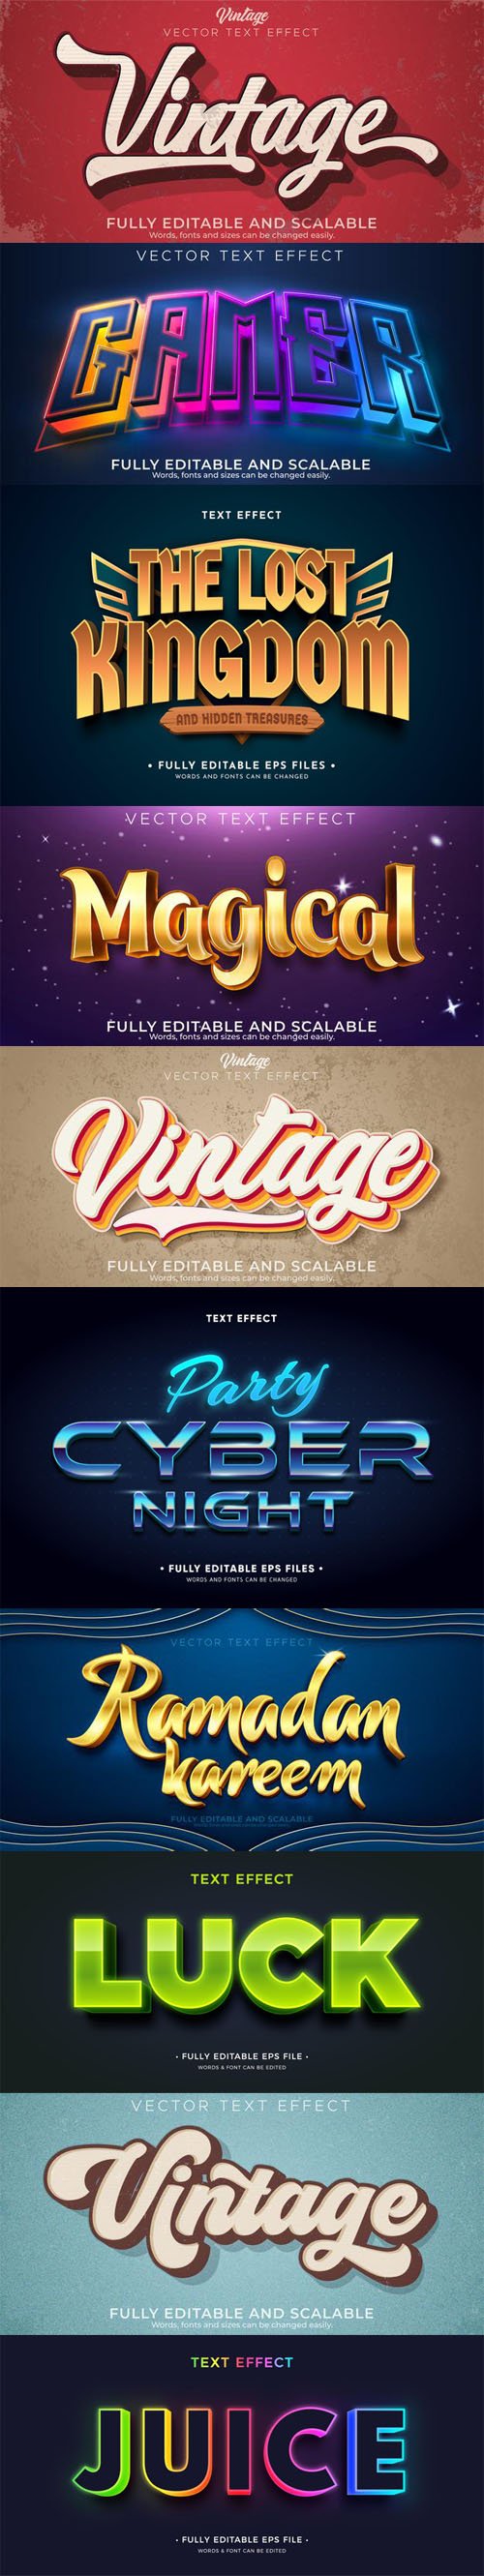 10 Creative Text Effects Vector Collection